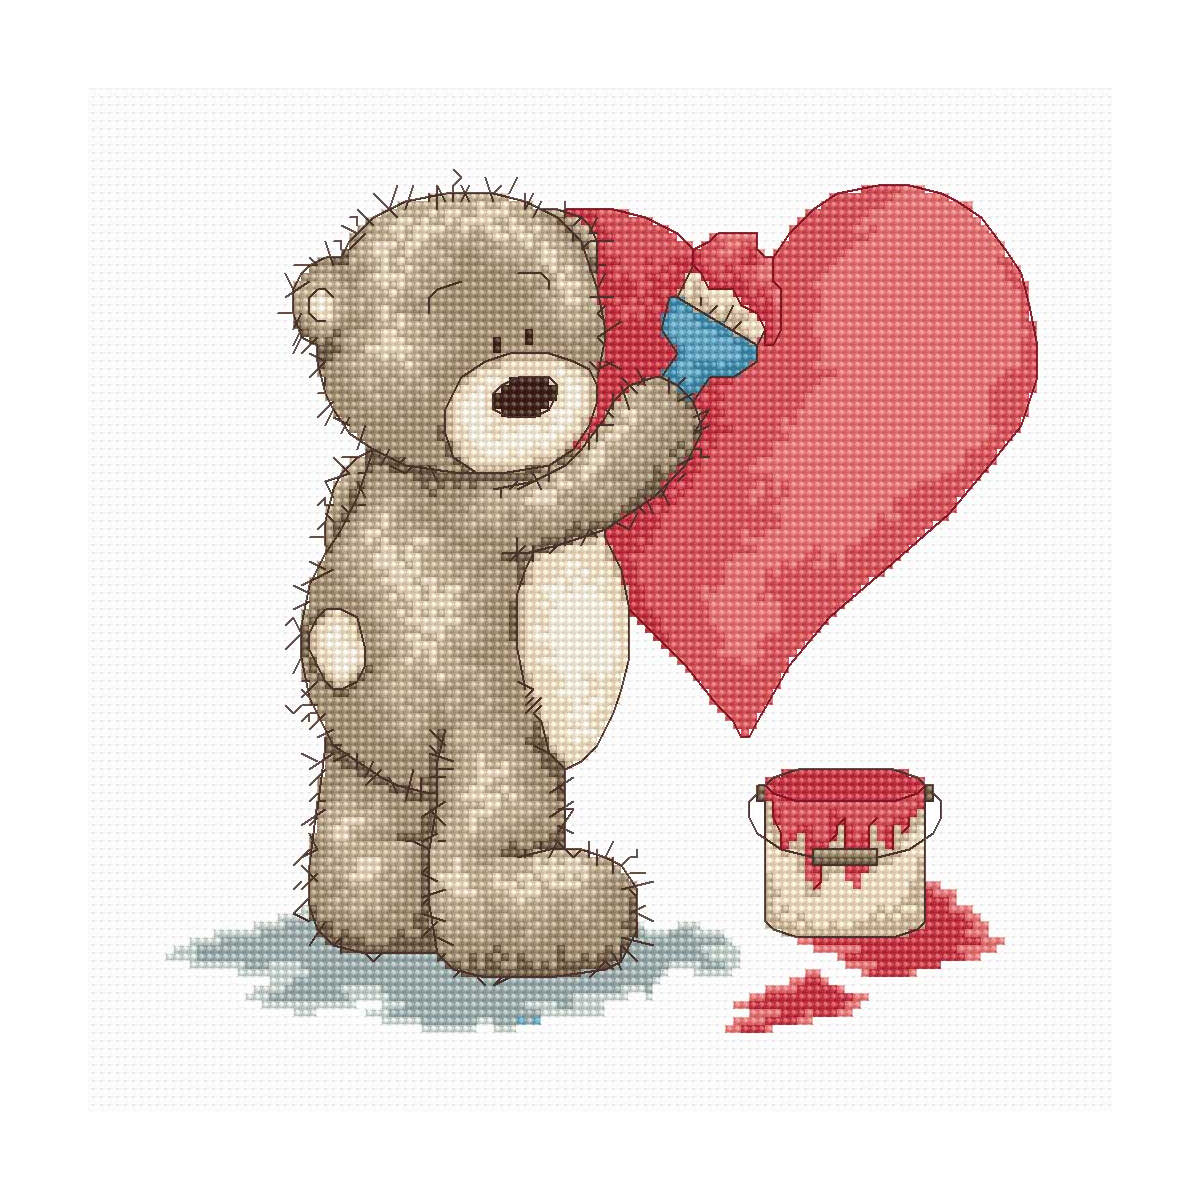 Luca-S counted Cross Stitch kit "Teddy Bruno with a...